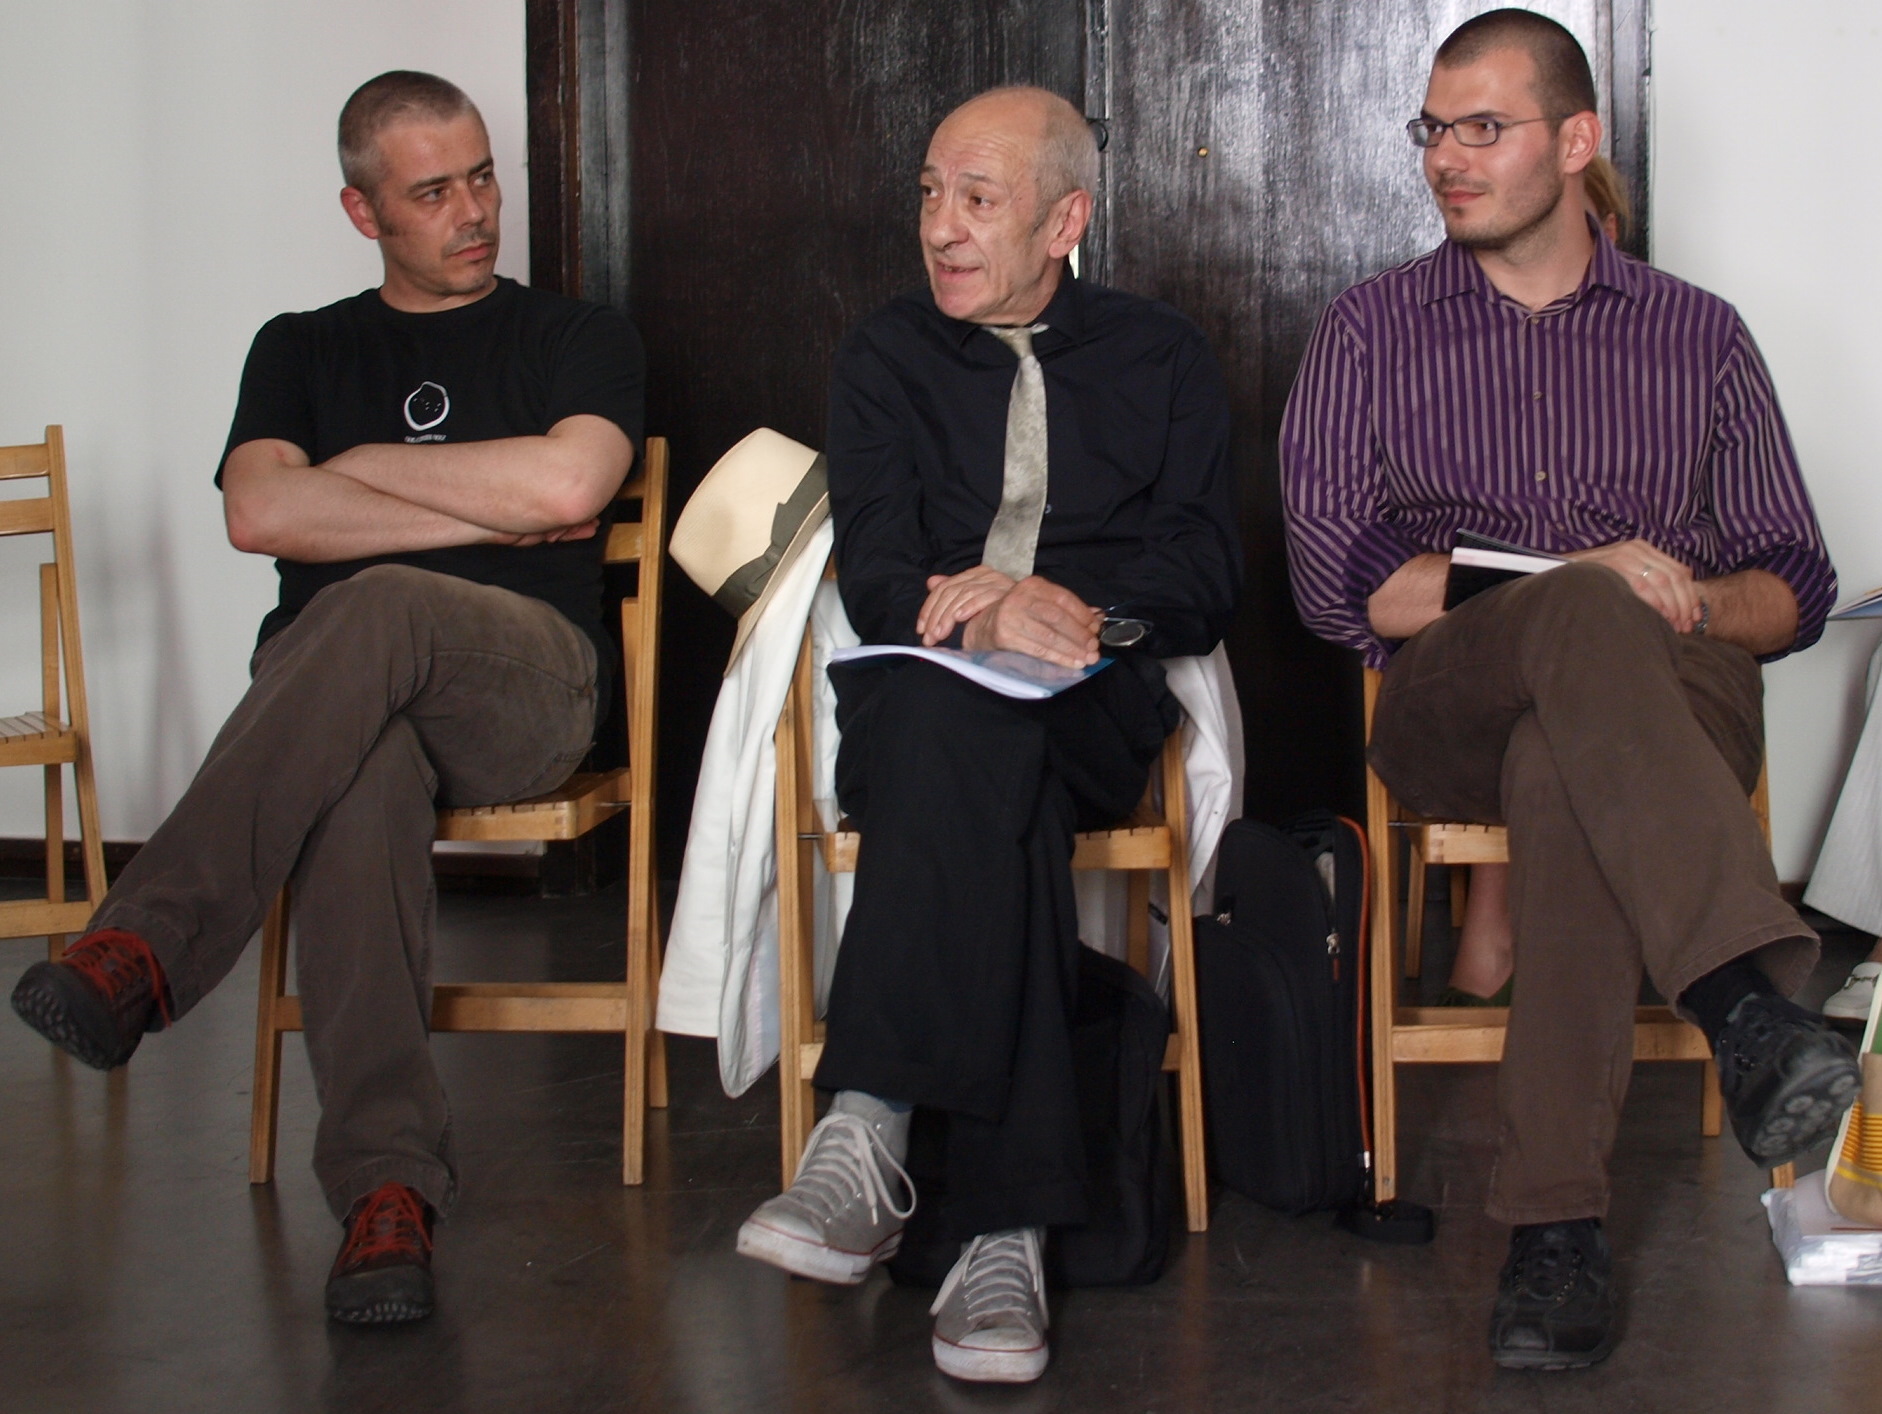 three men sitting next to each other on wooden chairs